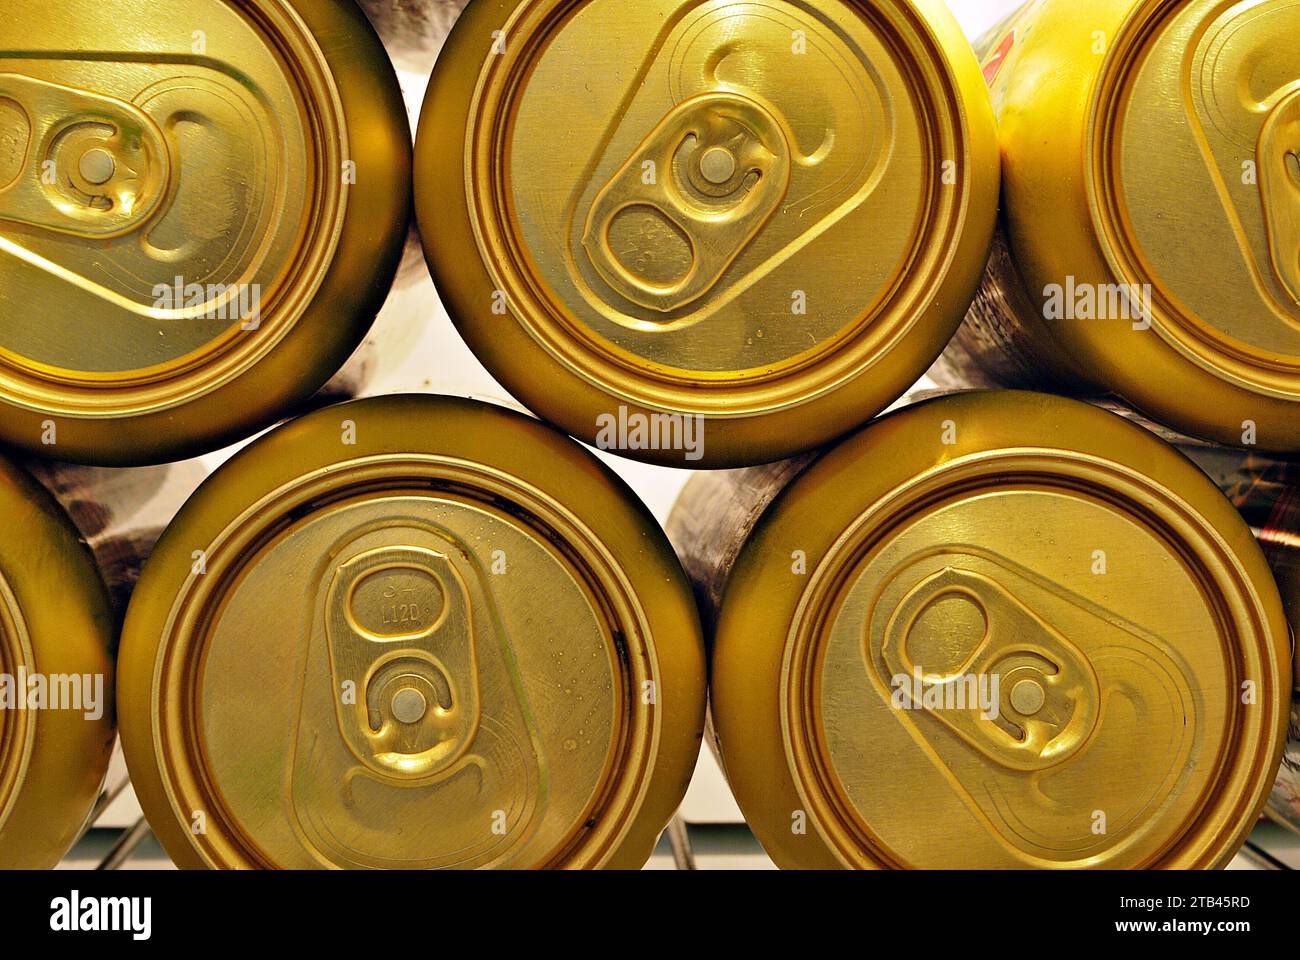 Golden beer cans Stock Photo